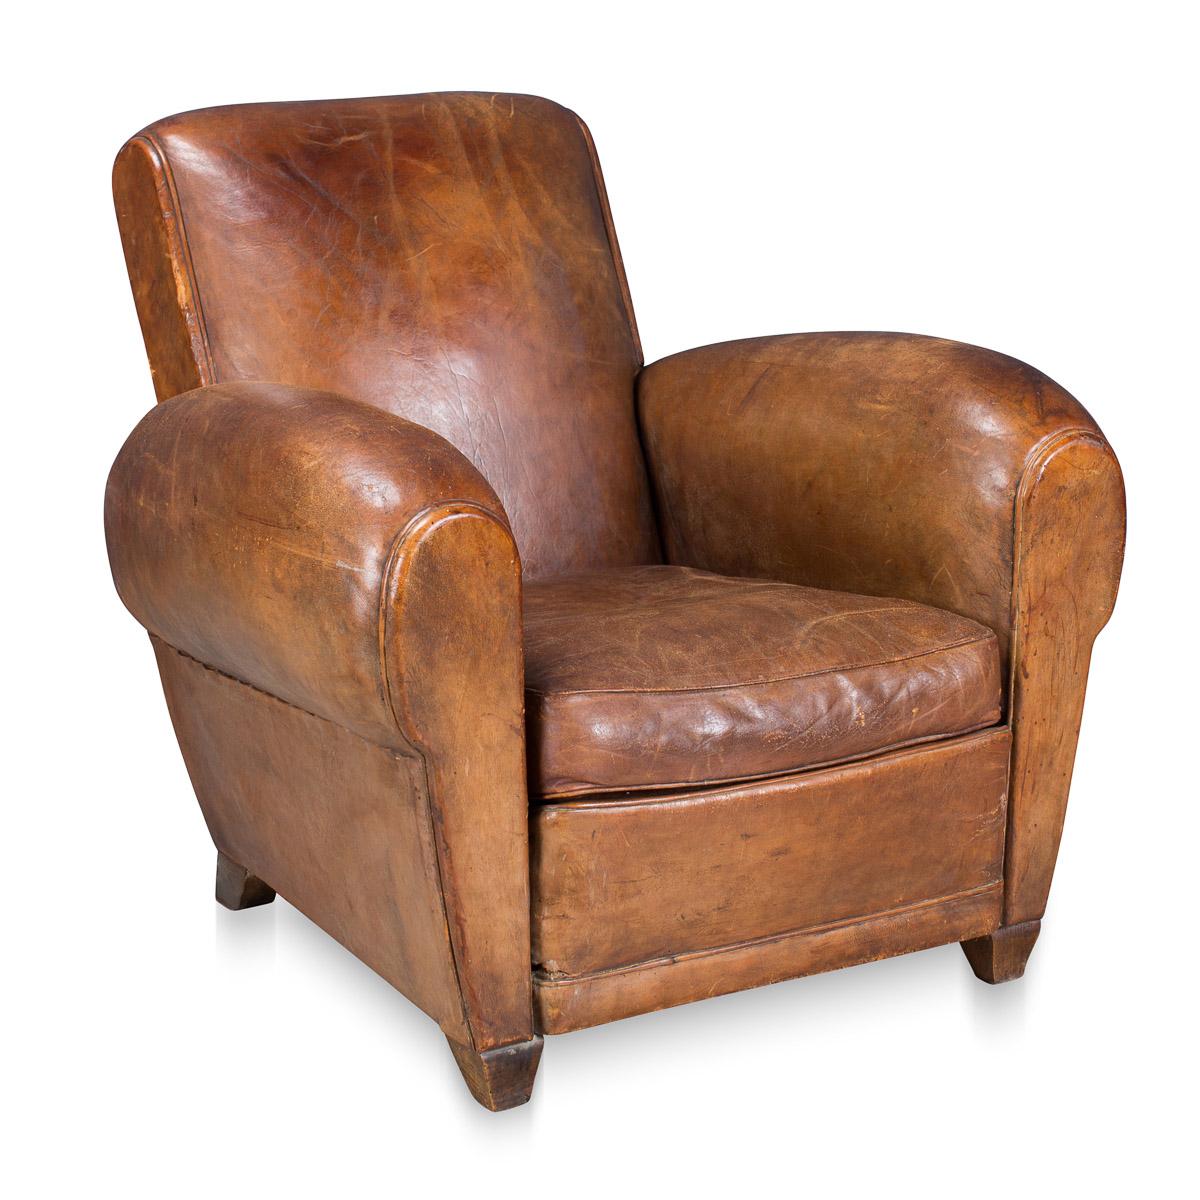 One of the most desirable models of chair, this French leather armchair dates back to the early part of the 20th century. Now fully restored, it has great charm and character.
Condition

In great condition. Some scuffs and wear consistent with